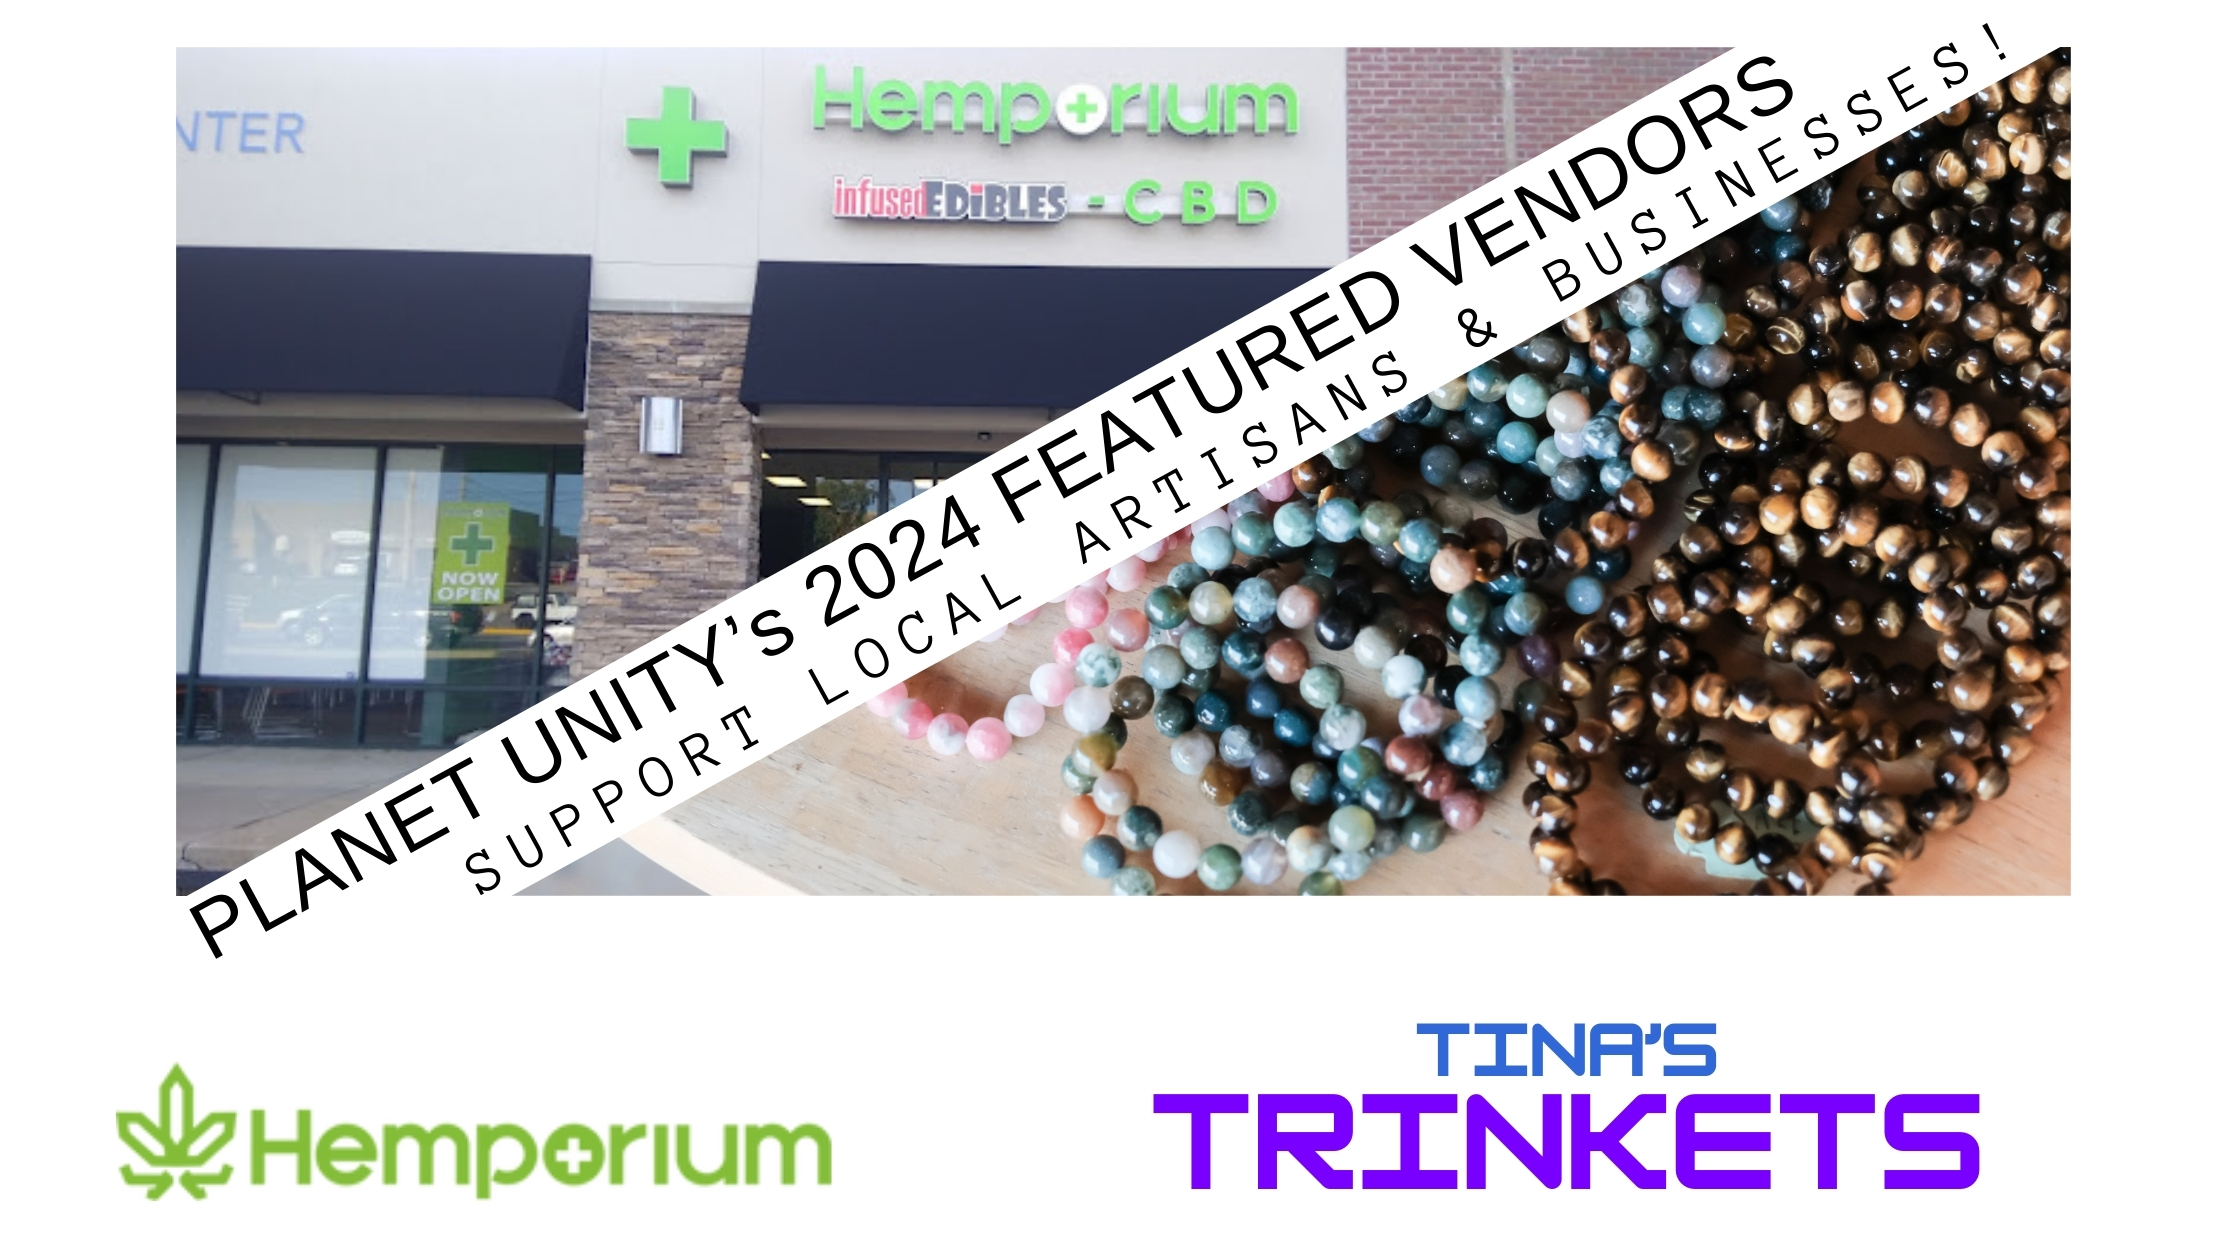 "Planet Unity's 2024 Featured Vendors | Support Local Artisans and Businesses" The Hemporium Store and bracelets. "Hemporium" and "Tina's Trinkets"